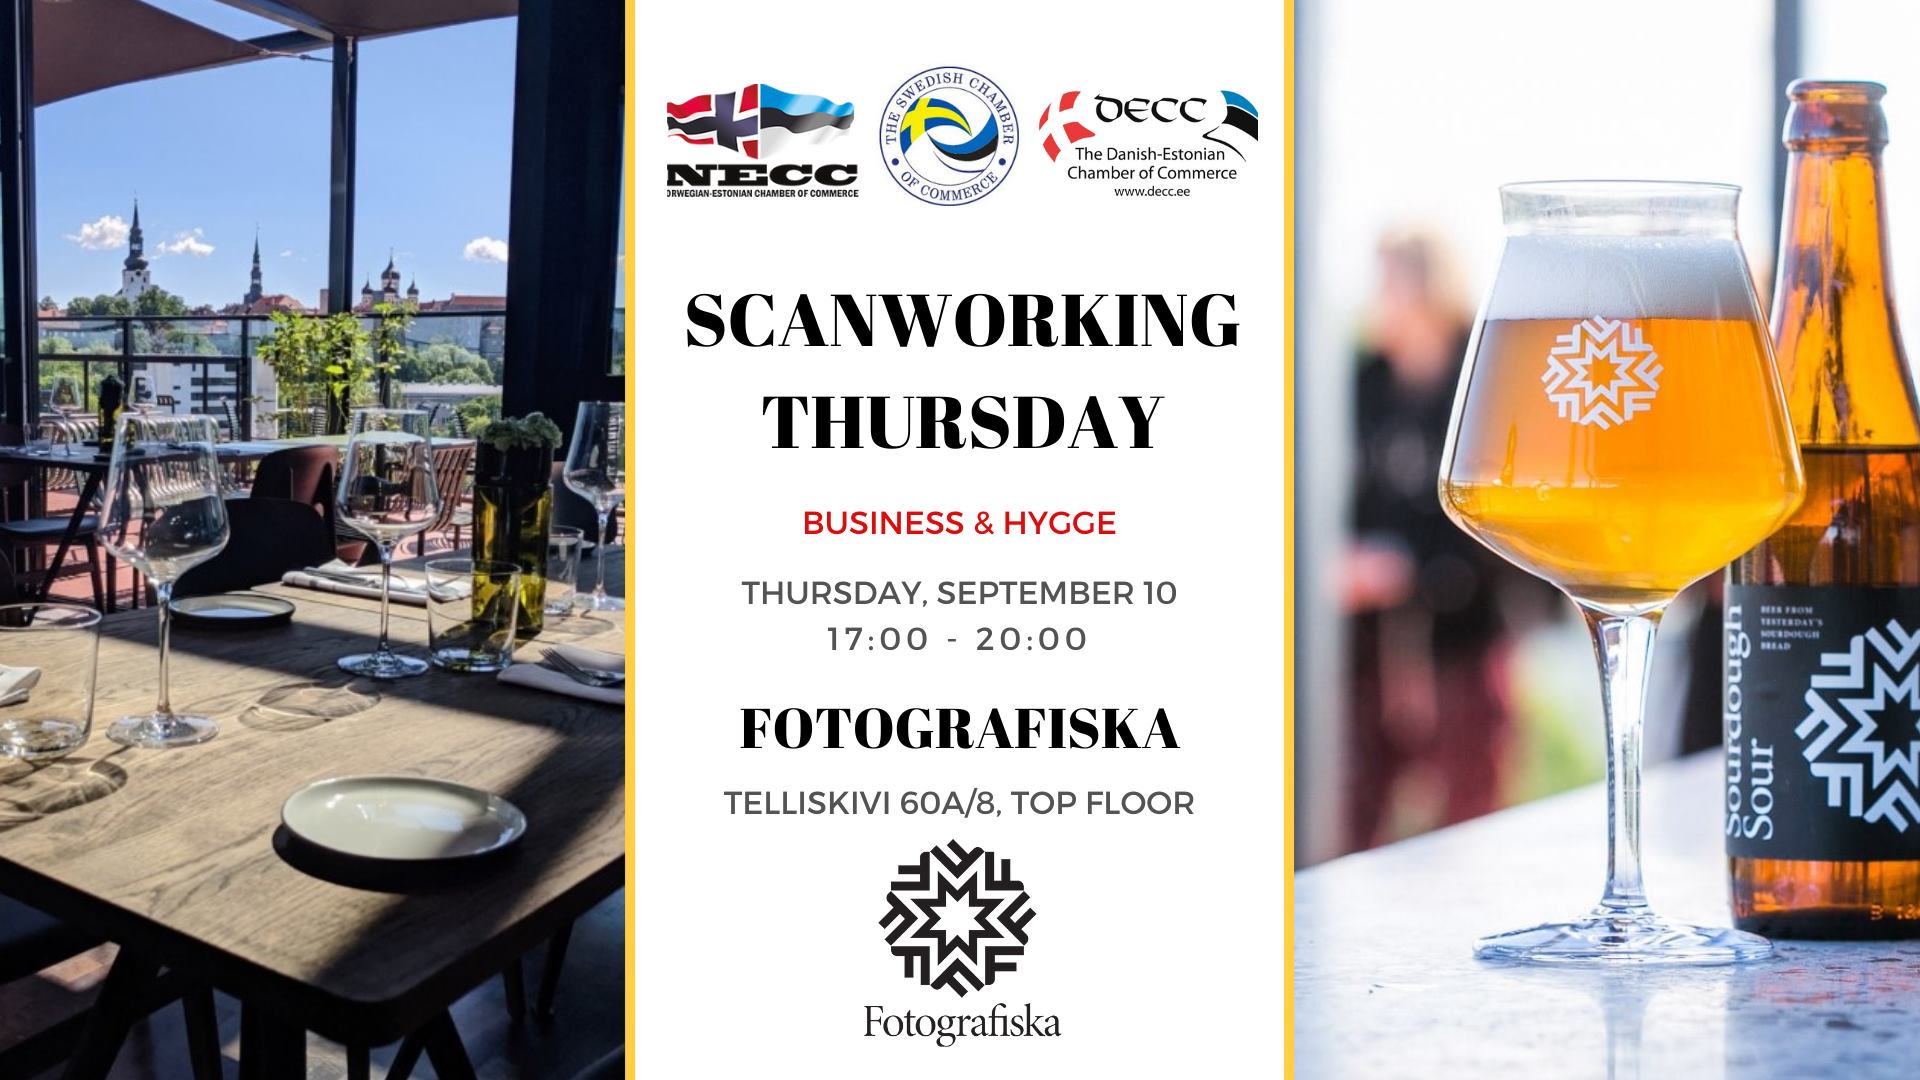 Scanworking Thursday - Business & Hygge